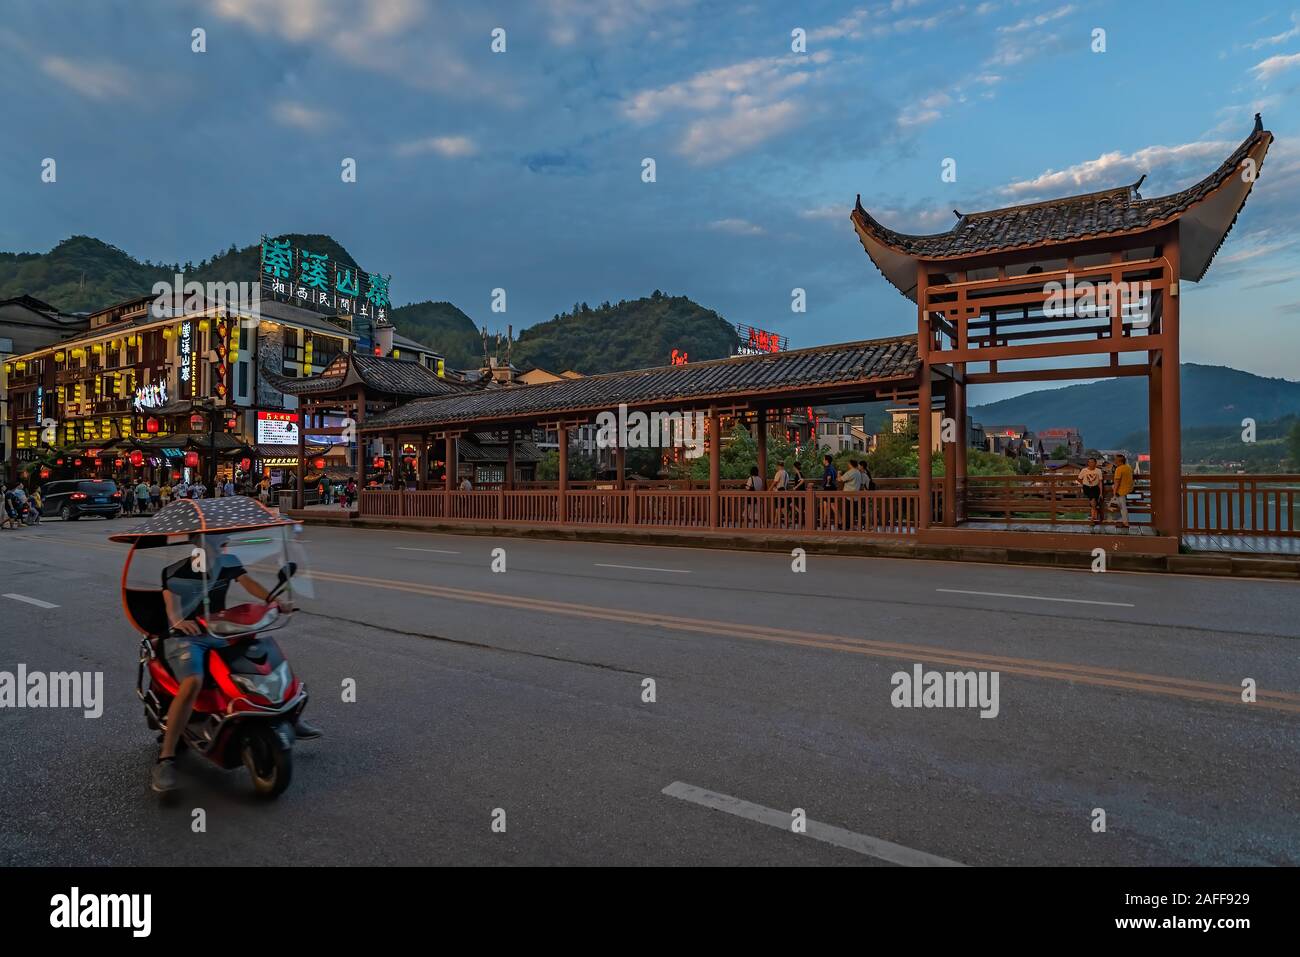 Wulingyuan, China -  August 2019 : Chinese man riding on a motorbike on a street in the ancient part of Wullingyuan town Stock Photo